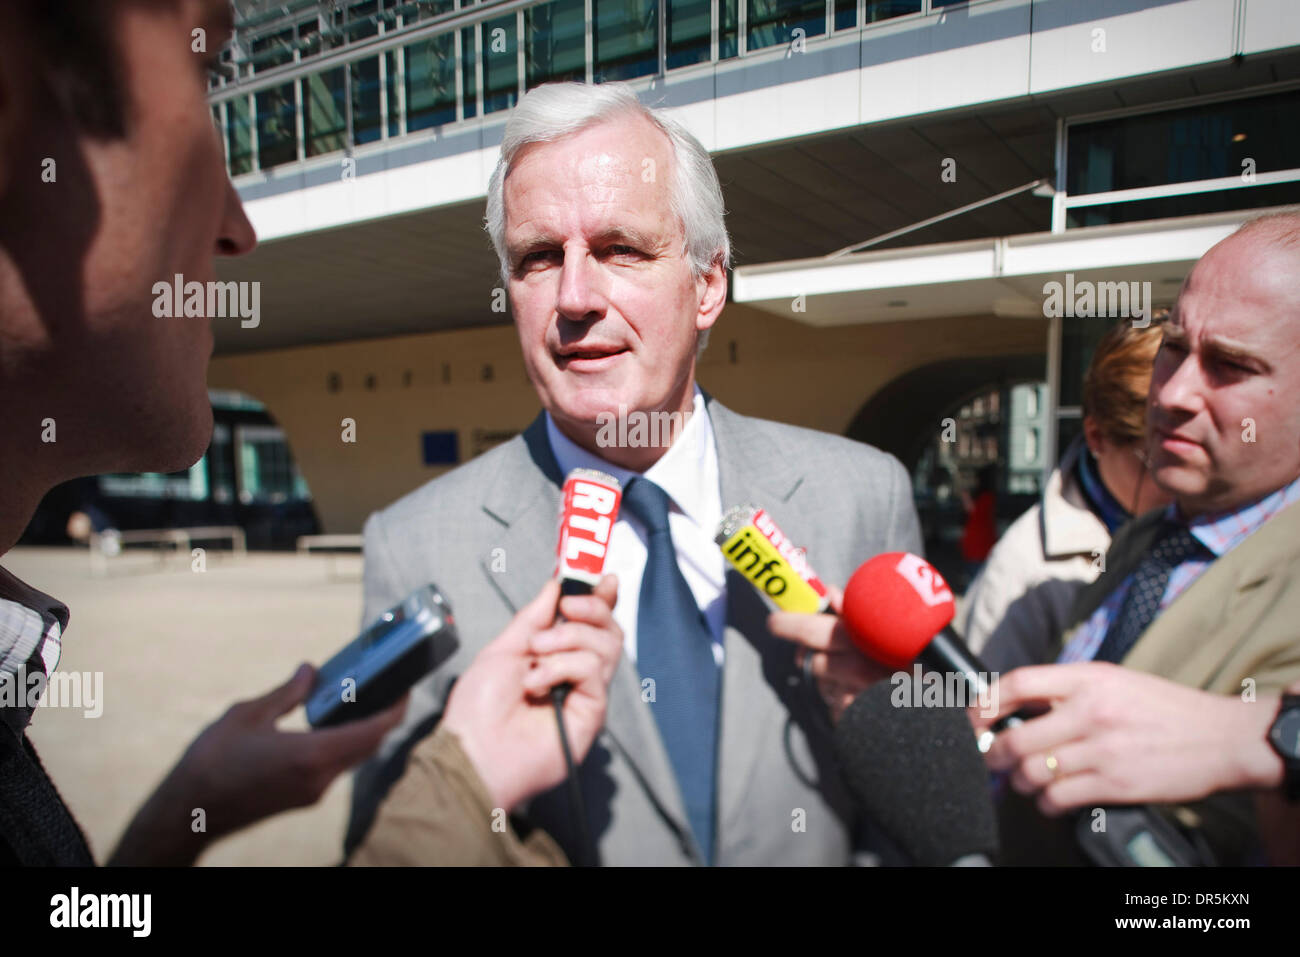 French Minister of Agriculture & Fisheries Michel BARNIER talks to the media, after a meeting with French Fischerman and the EU Maritime affairs and fisheries Commissioner (Not pictured) in front of the headquarter of the European Commisison  in  Brussels, Belgium on 2009-04-23  Â© by Wiktor Dabkowski ....POLAND OUT  (Credit Image: © Wiktor Dabkowski/ZUMA Press) Stock Photo